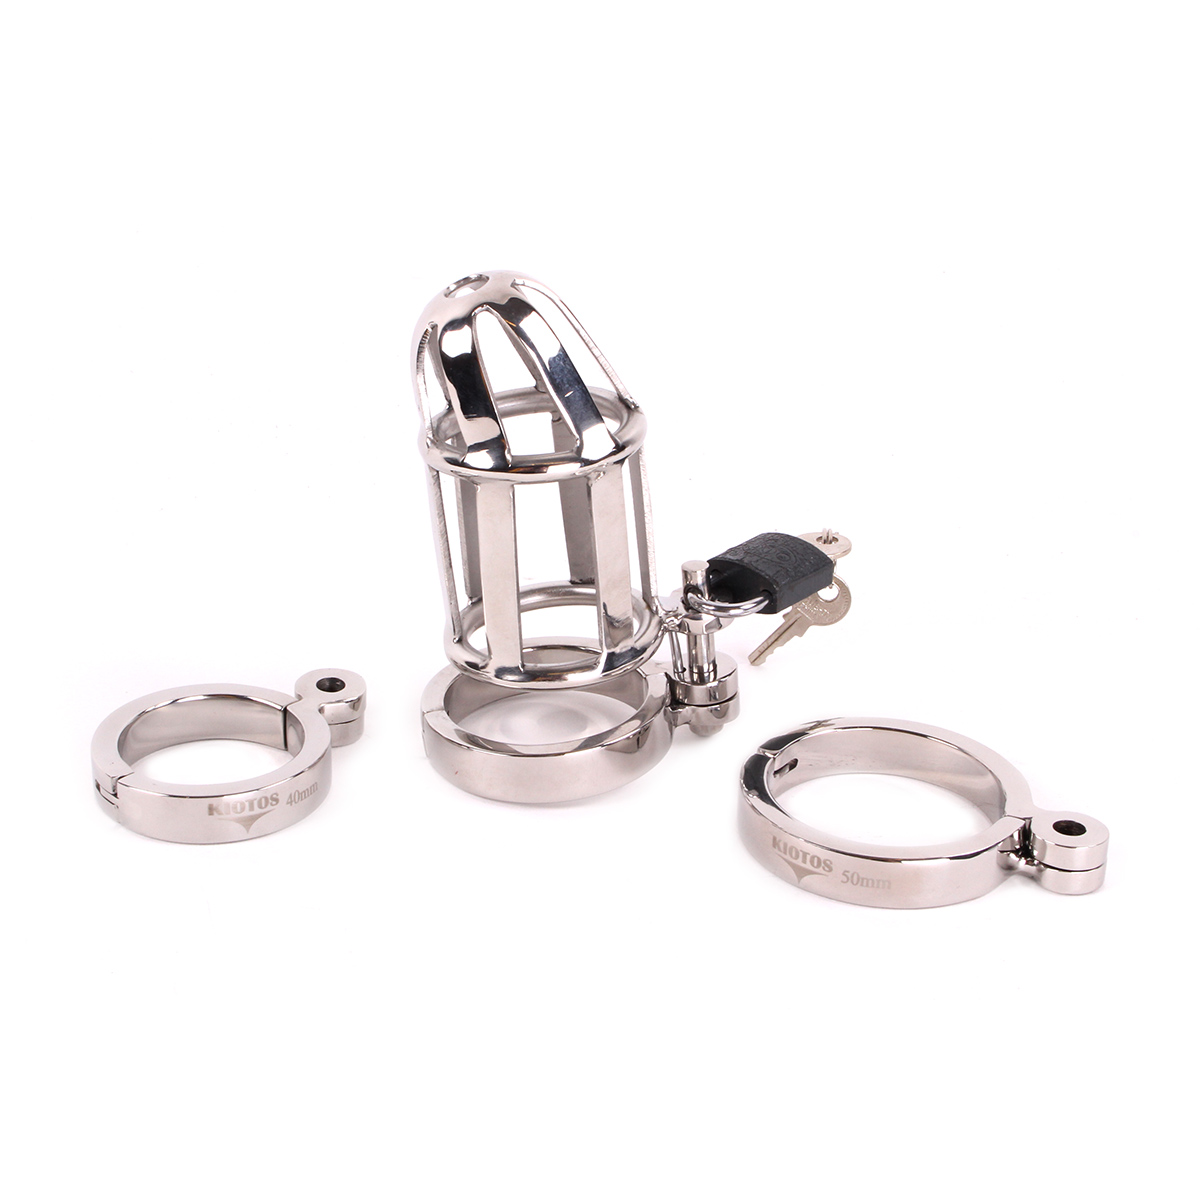 Chastity-Cage-DeLuxe-8-cm-OPR-277024-1